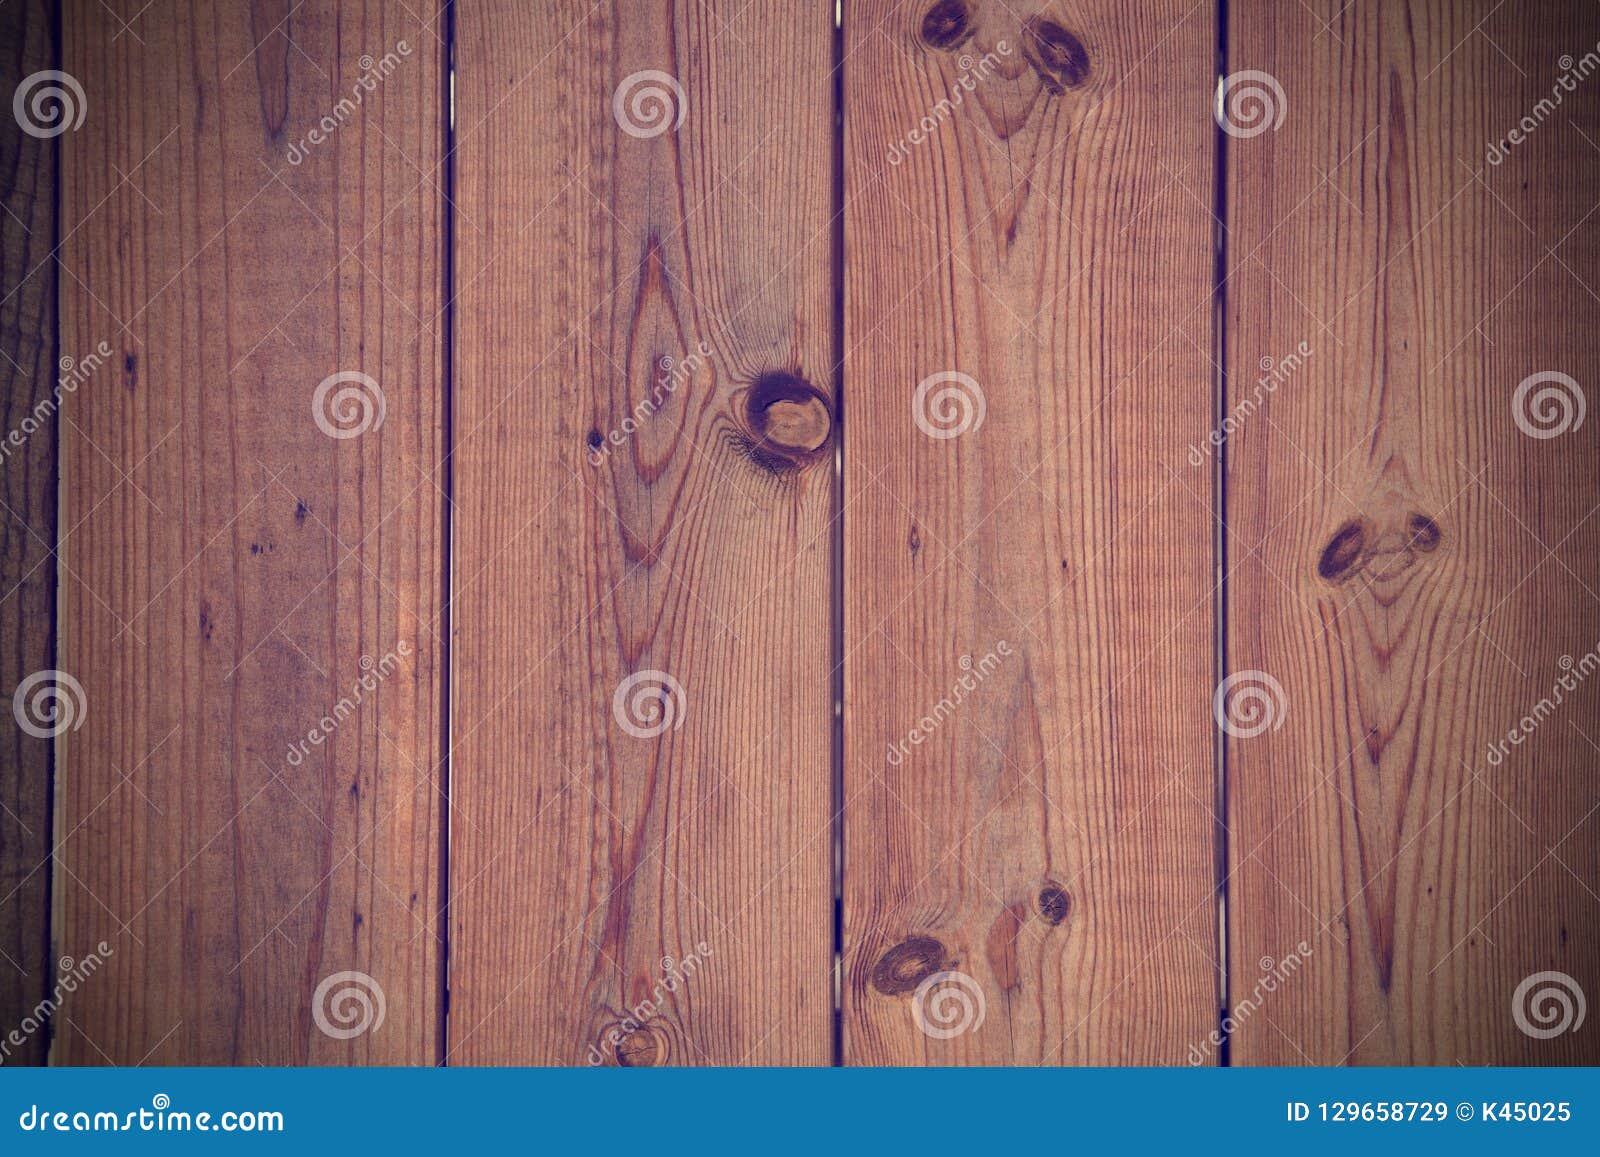 Rustic Natural Wooden Background. Instagram Filter Style Stock Image -  Image of pattern, backgrounds: 129658729